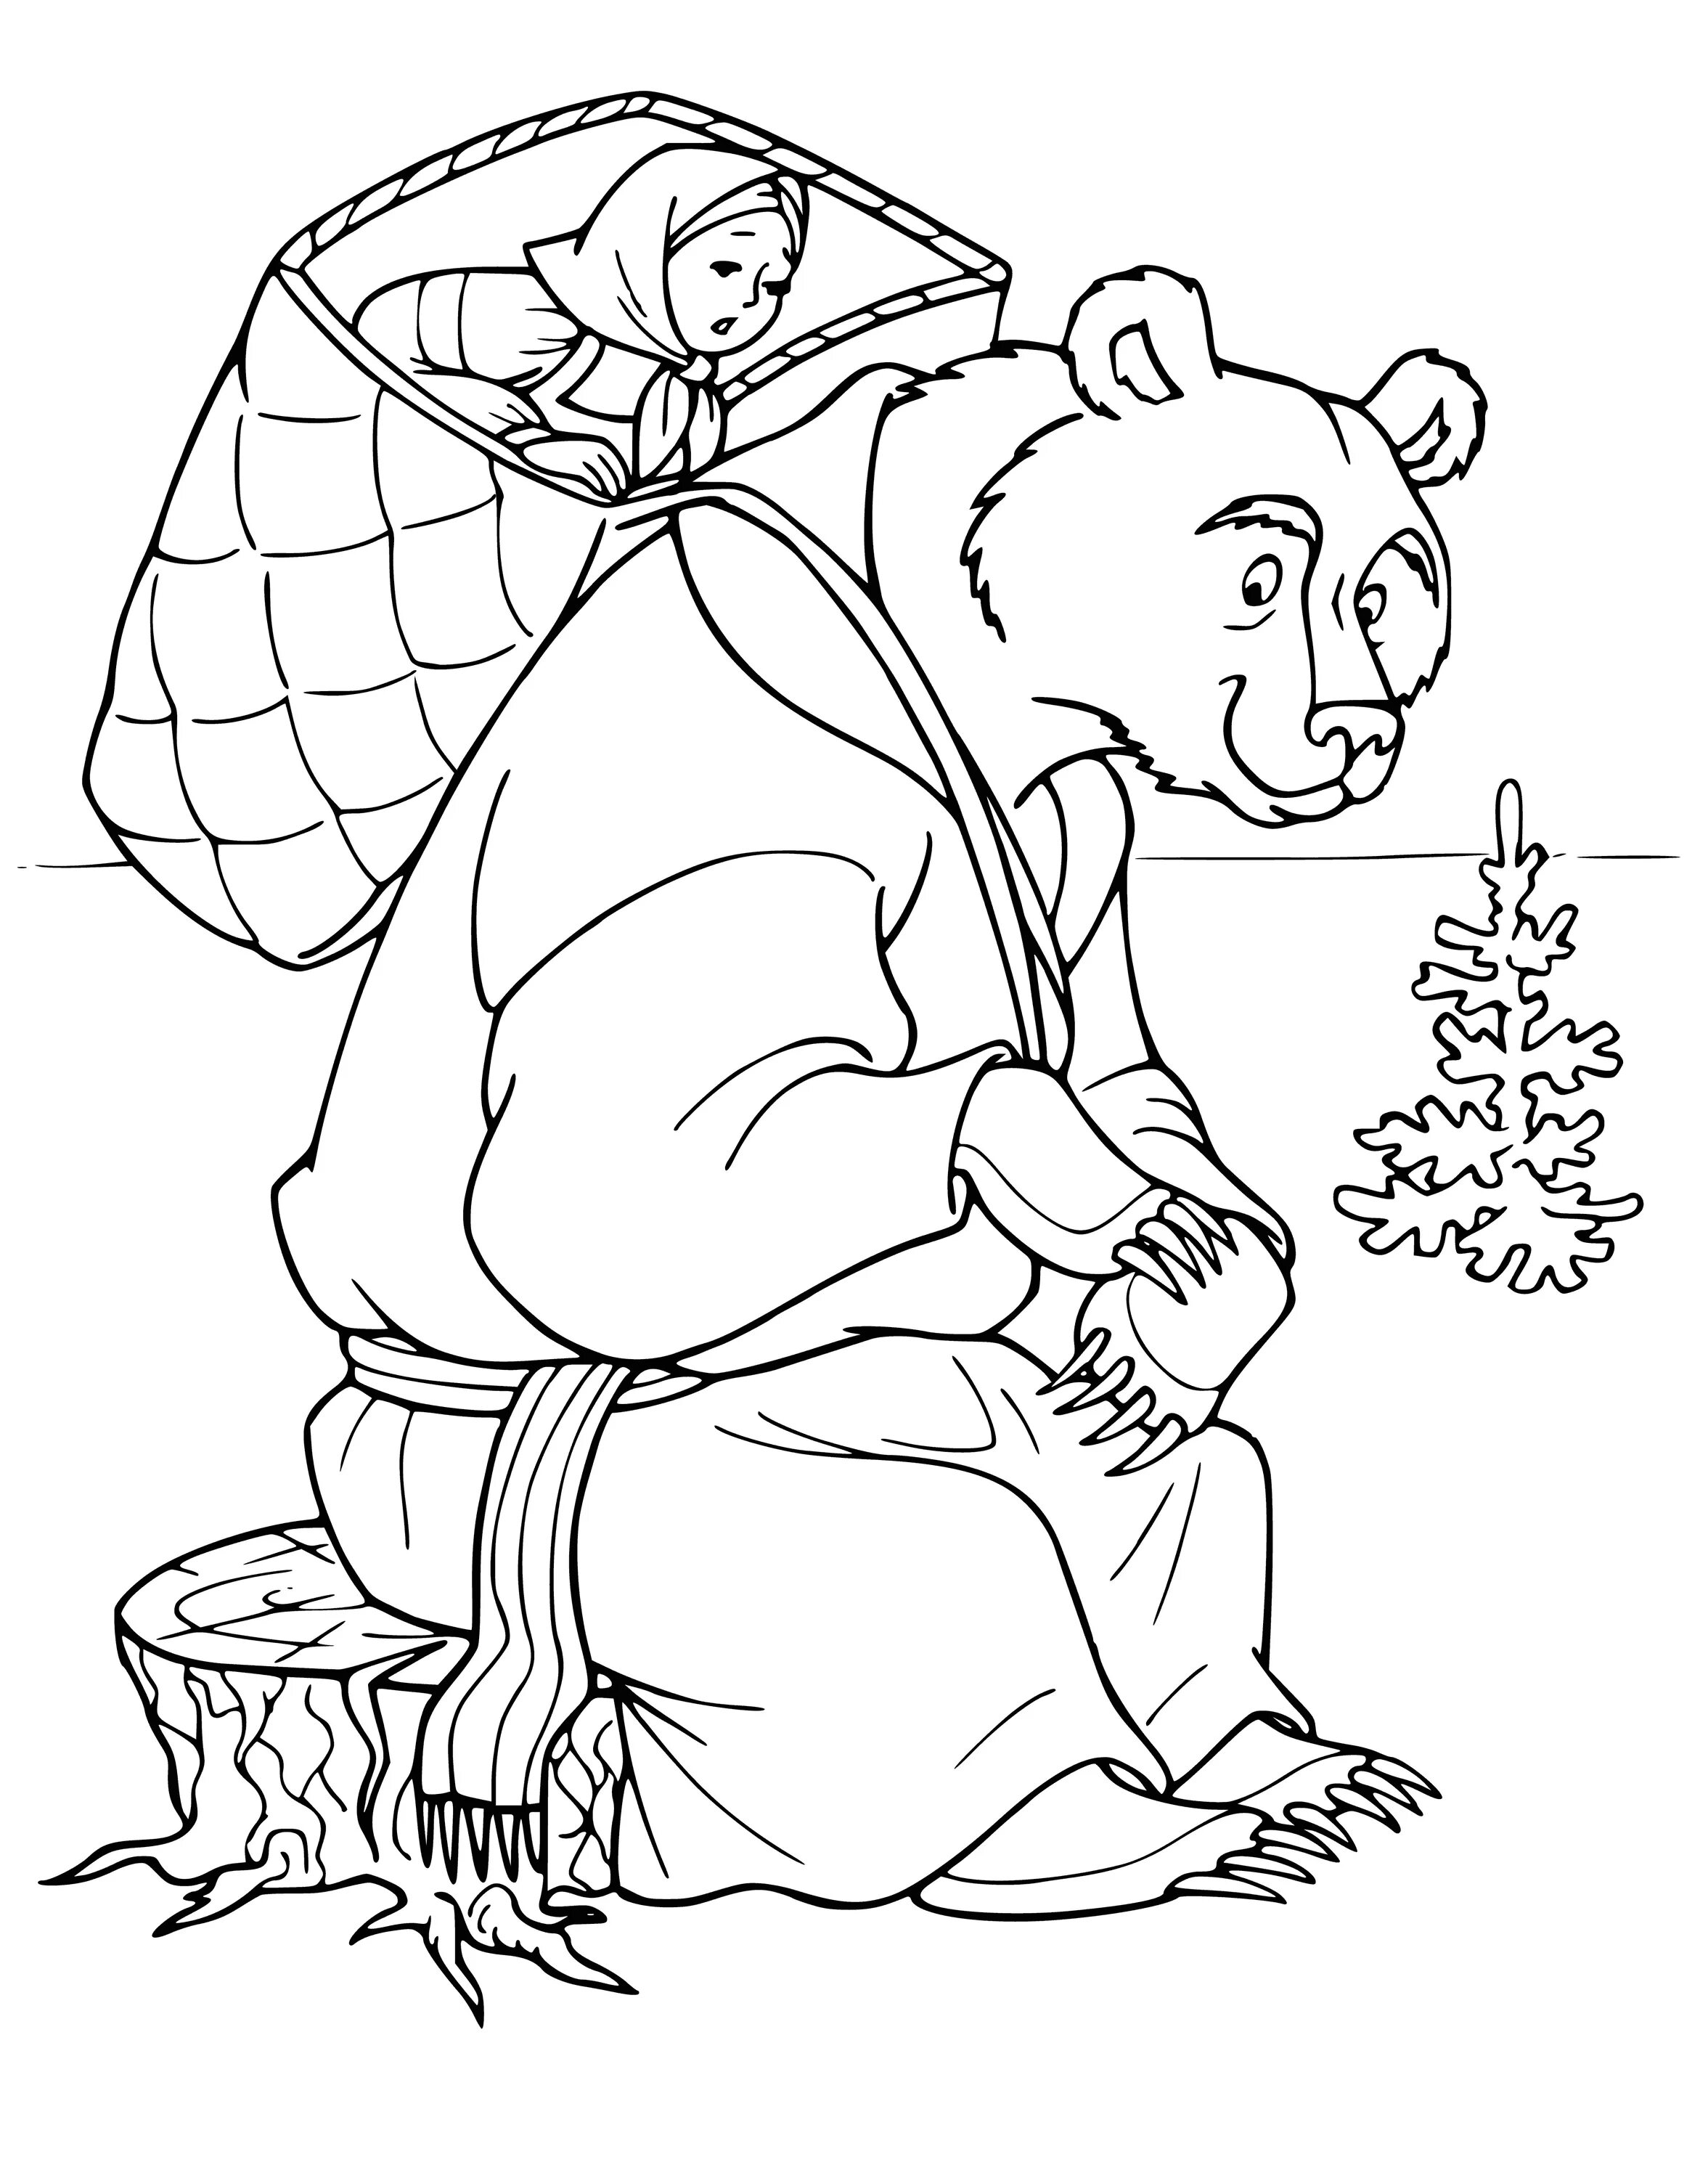 Fascinating coloring book Masha and the Bear fairy tale for children